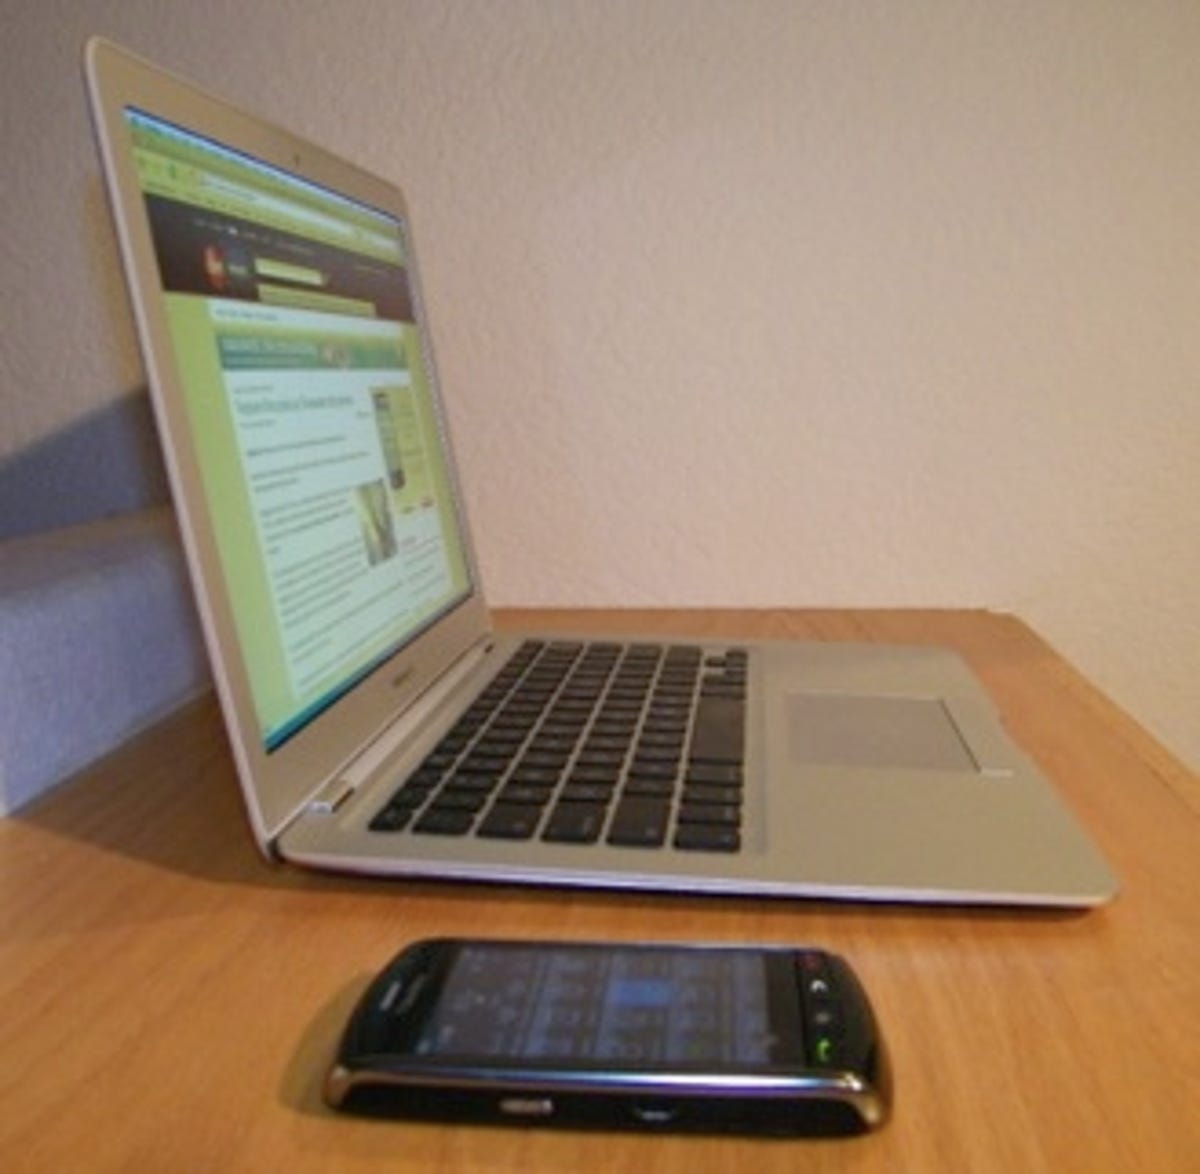 The MacBook Air can use the Blackberry Storm as a Bluetooth 3G modem